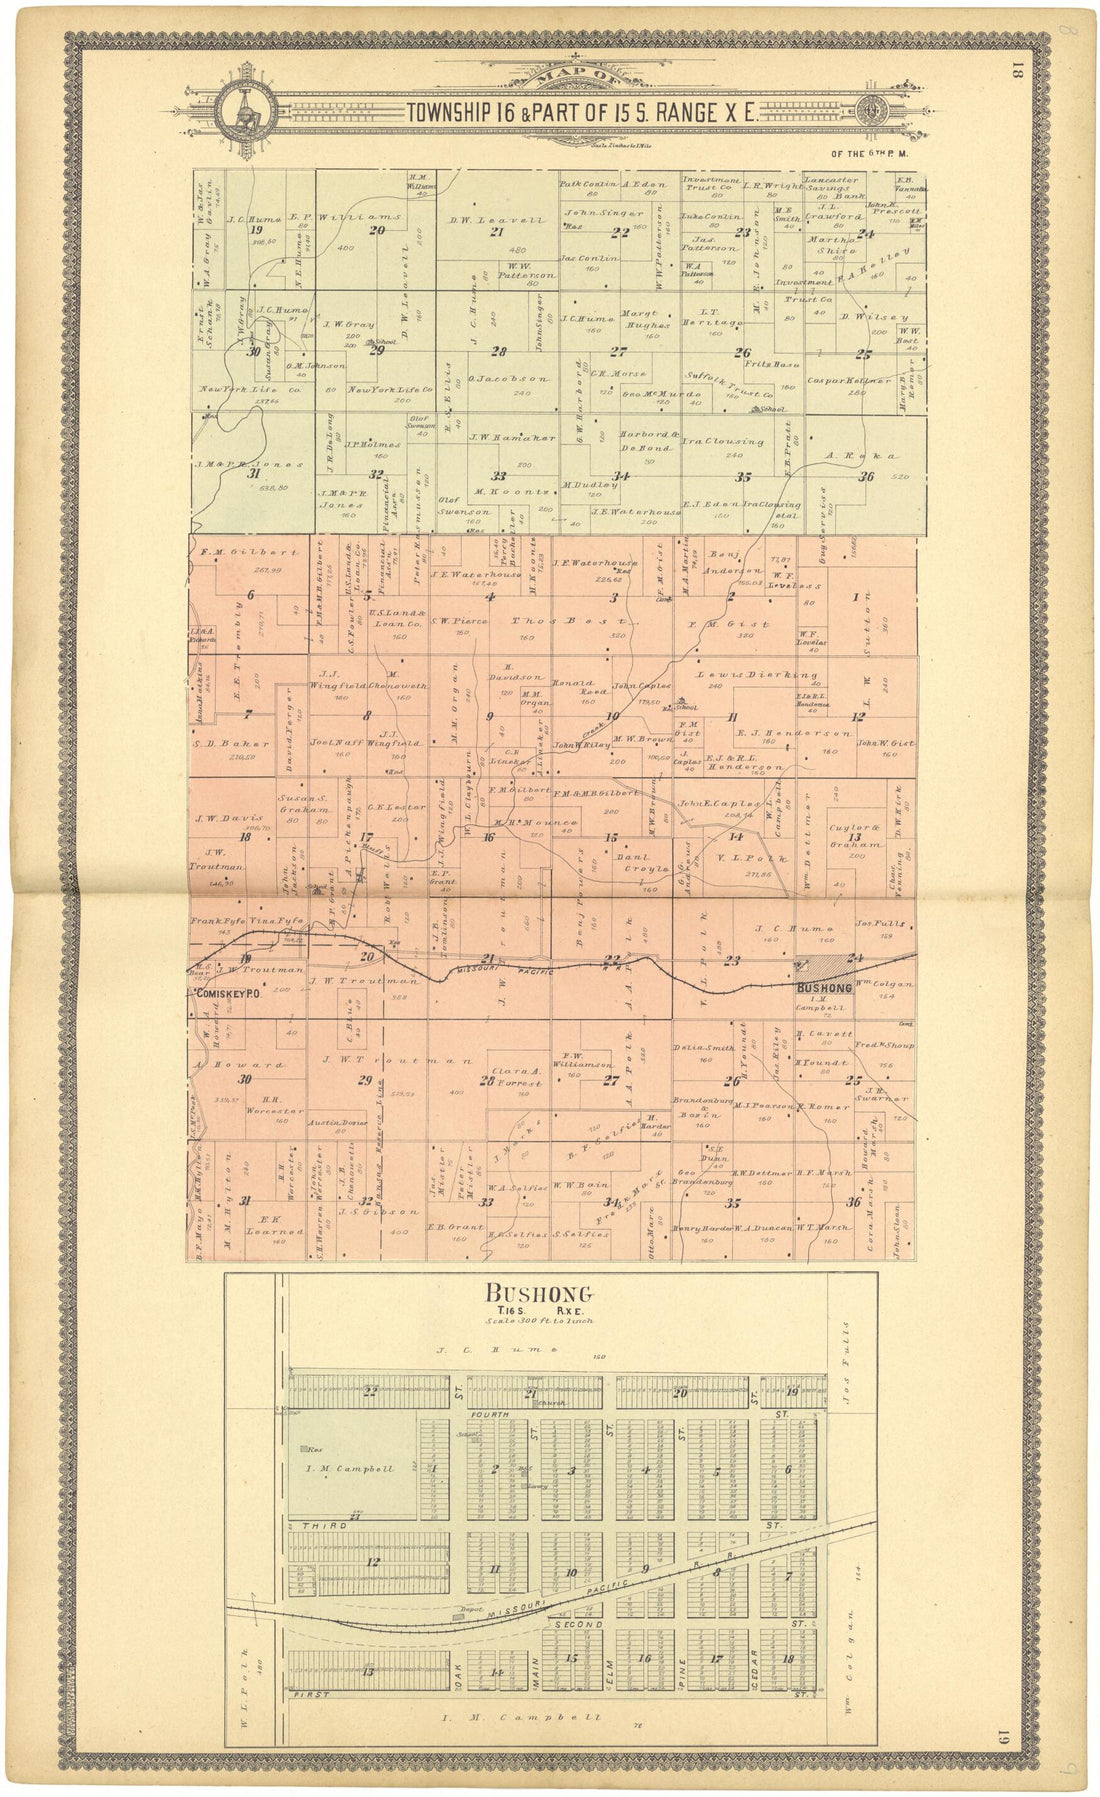 This old map of Map of Township 16 &amp; Part of 15 S. Range X E. from Standard Atlas of Lyon County, Kansas from 1901 was created by  Geo. A. Ogle &amp; Co in 1901